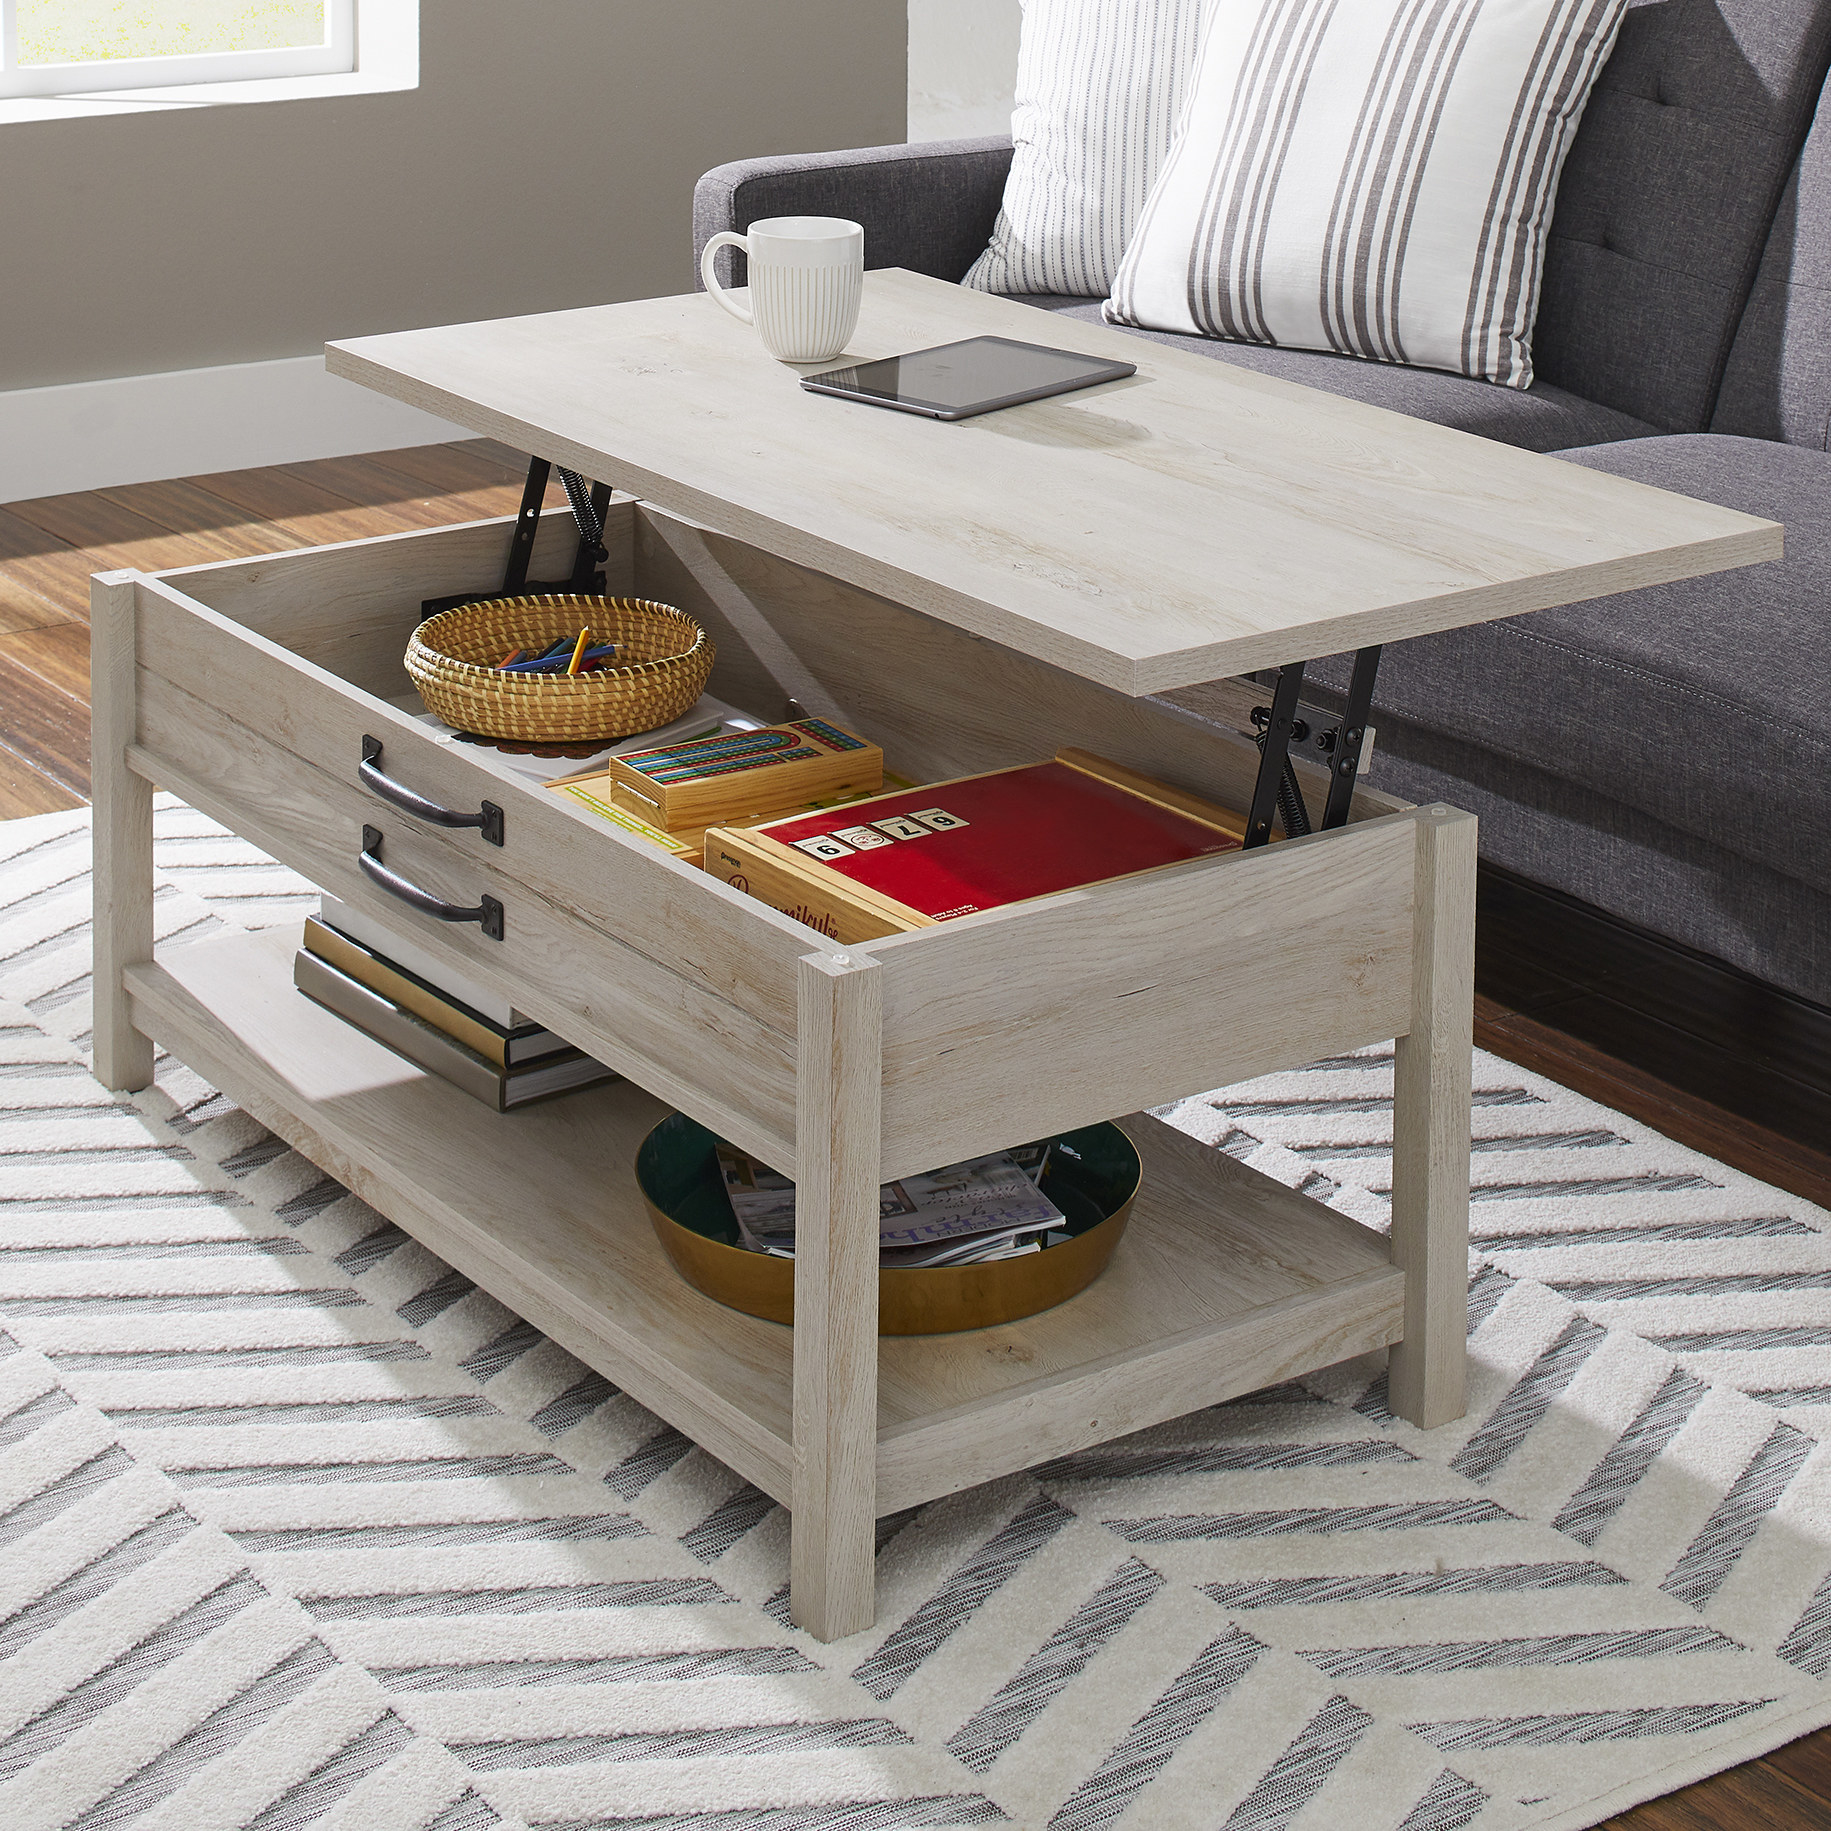 Farmhouse style coffee table with top lifted and miscellaneous products inside